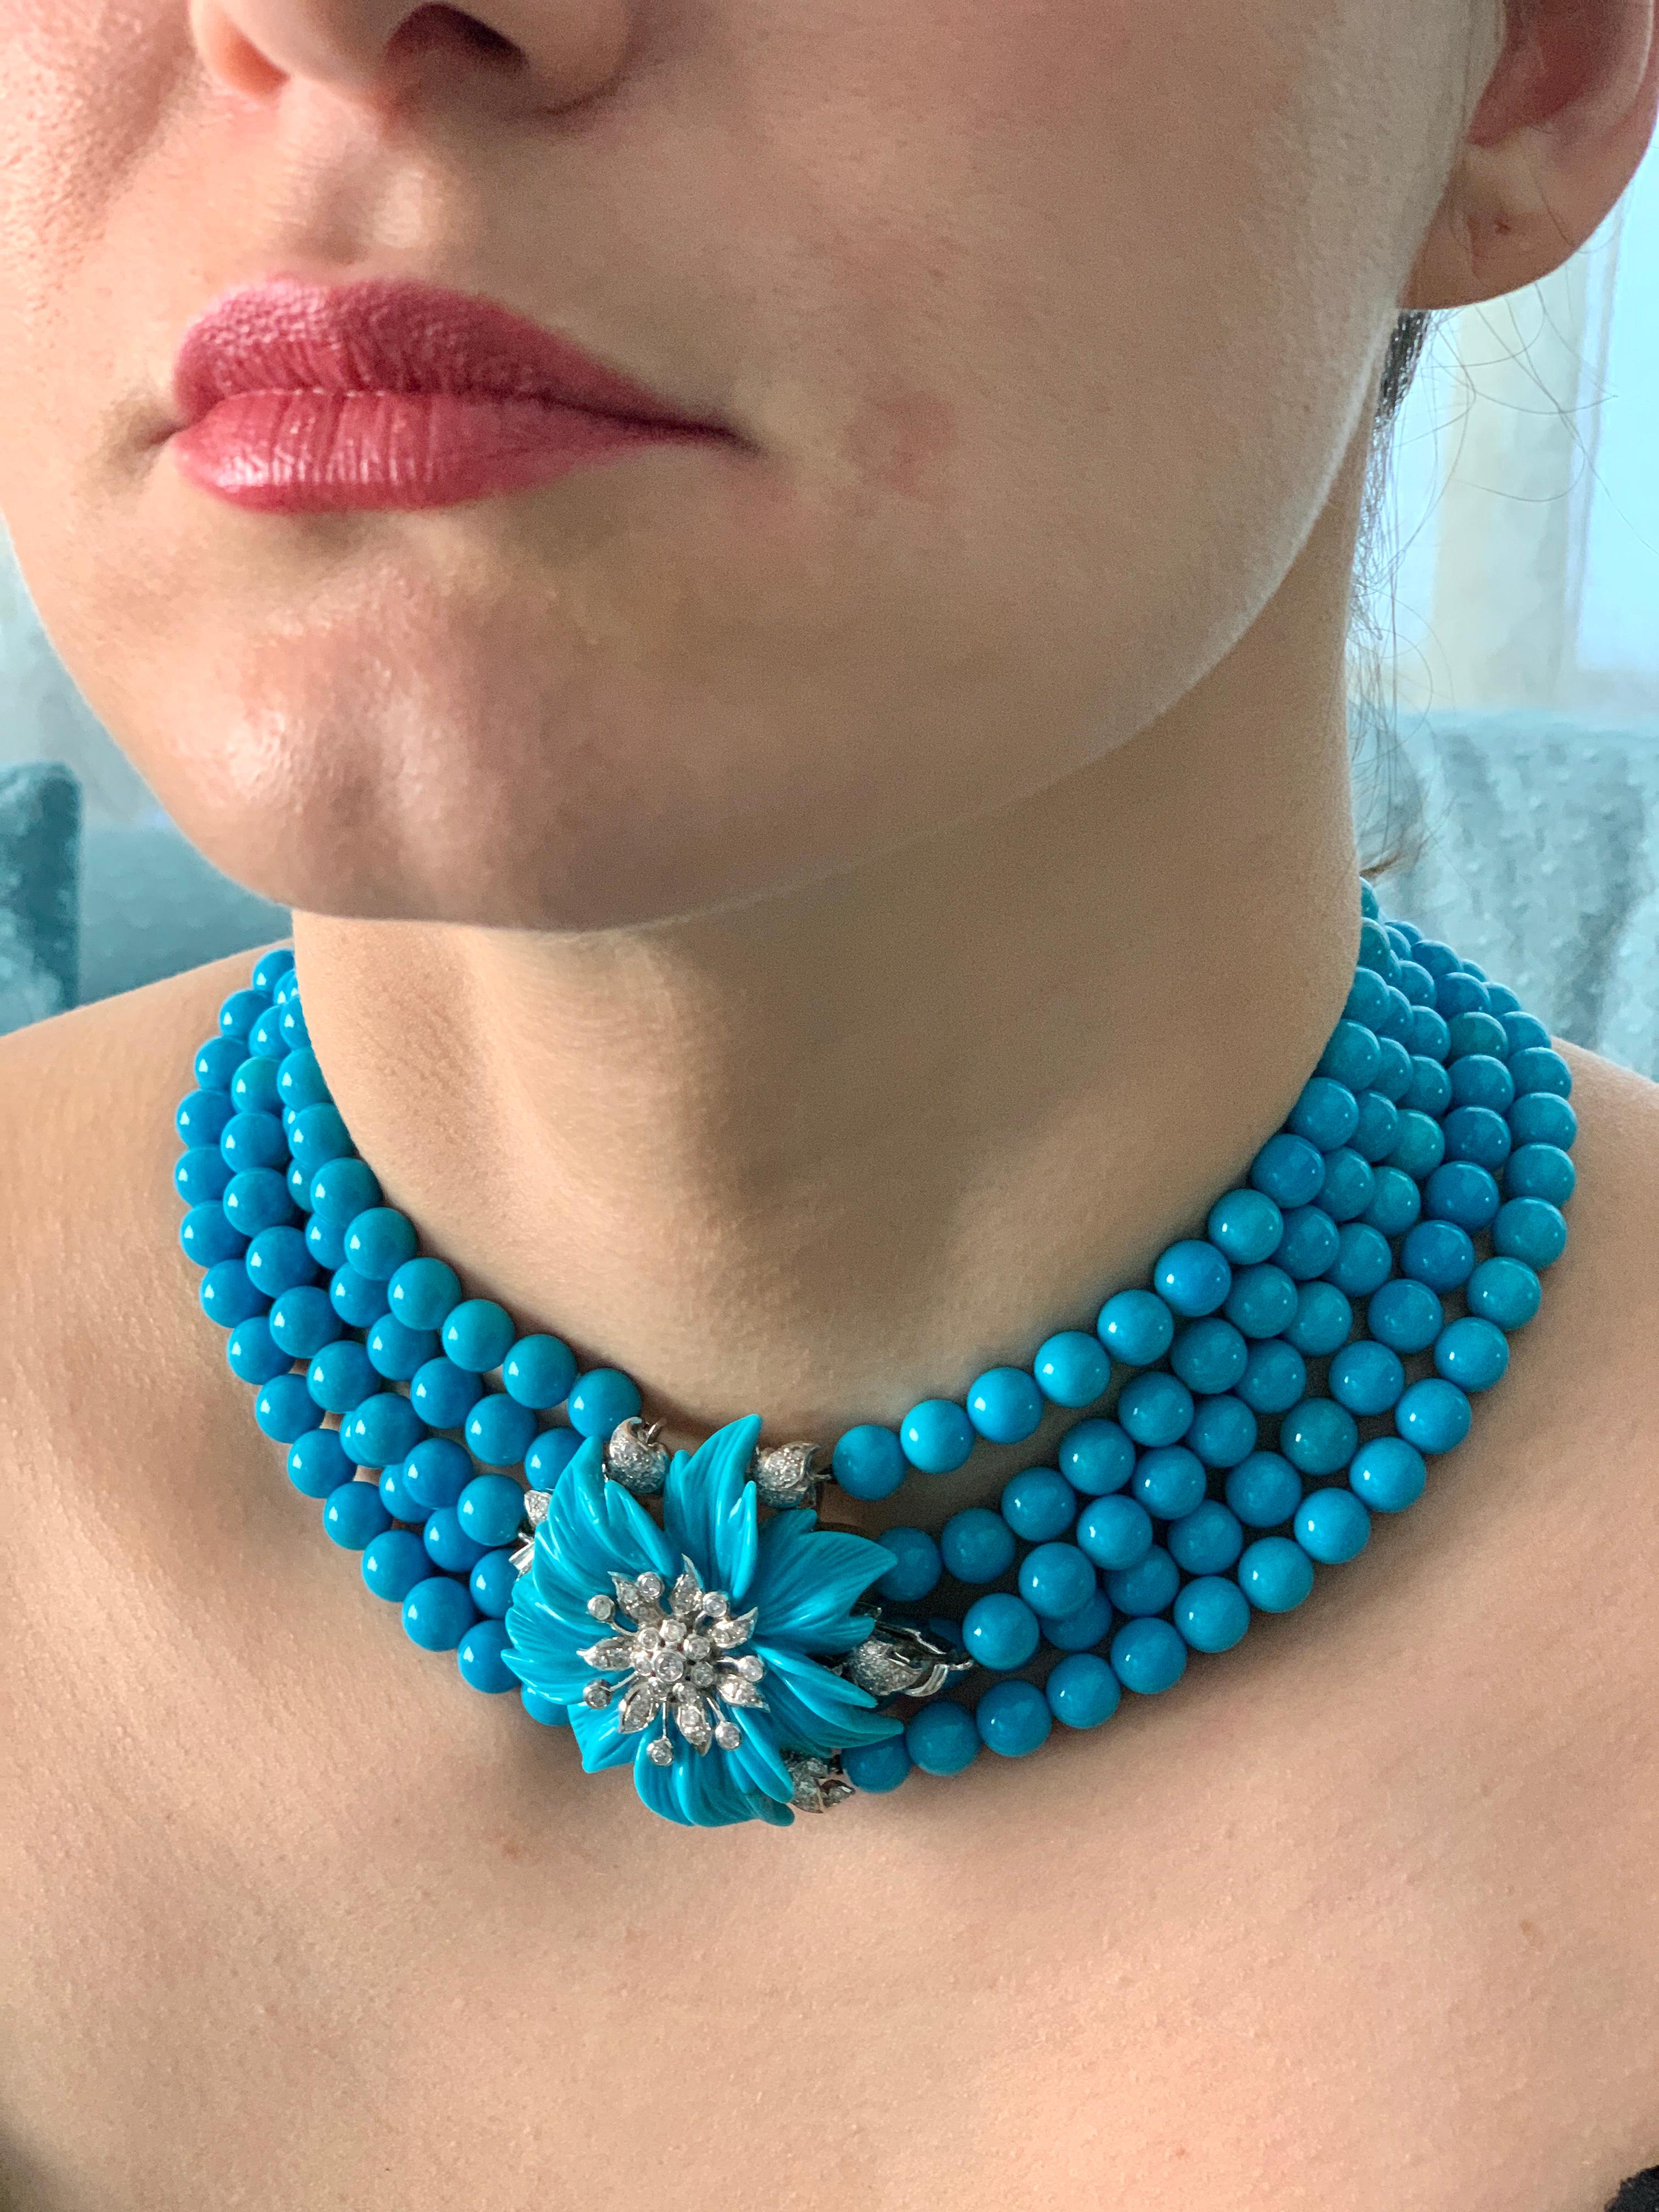 Natural Sleeping Beauty Turquoise Necklace Five Strand & Diamond French Clasp
Natural Sleeping Beauty Turquoise which is very hard to find now. A rare Gem
Necklace 5 strands average 8 MM Beads 
237  Beads and a big flower
One Turquoise Flower with